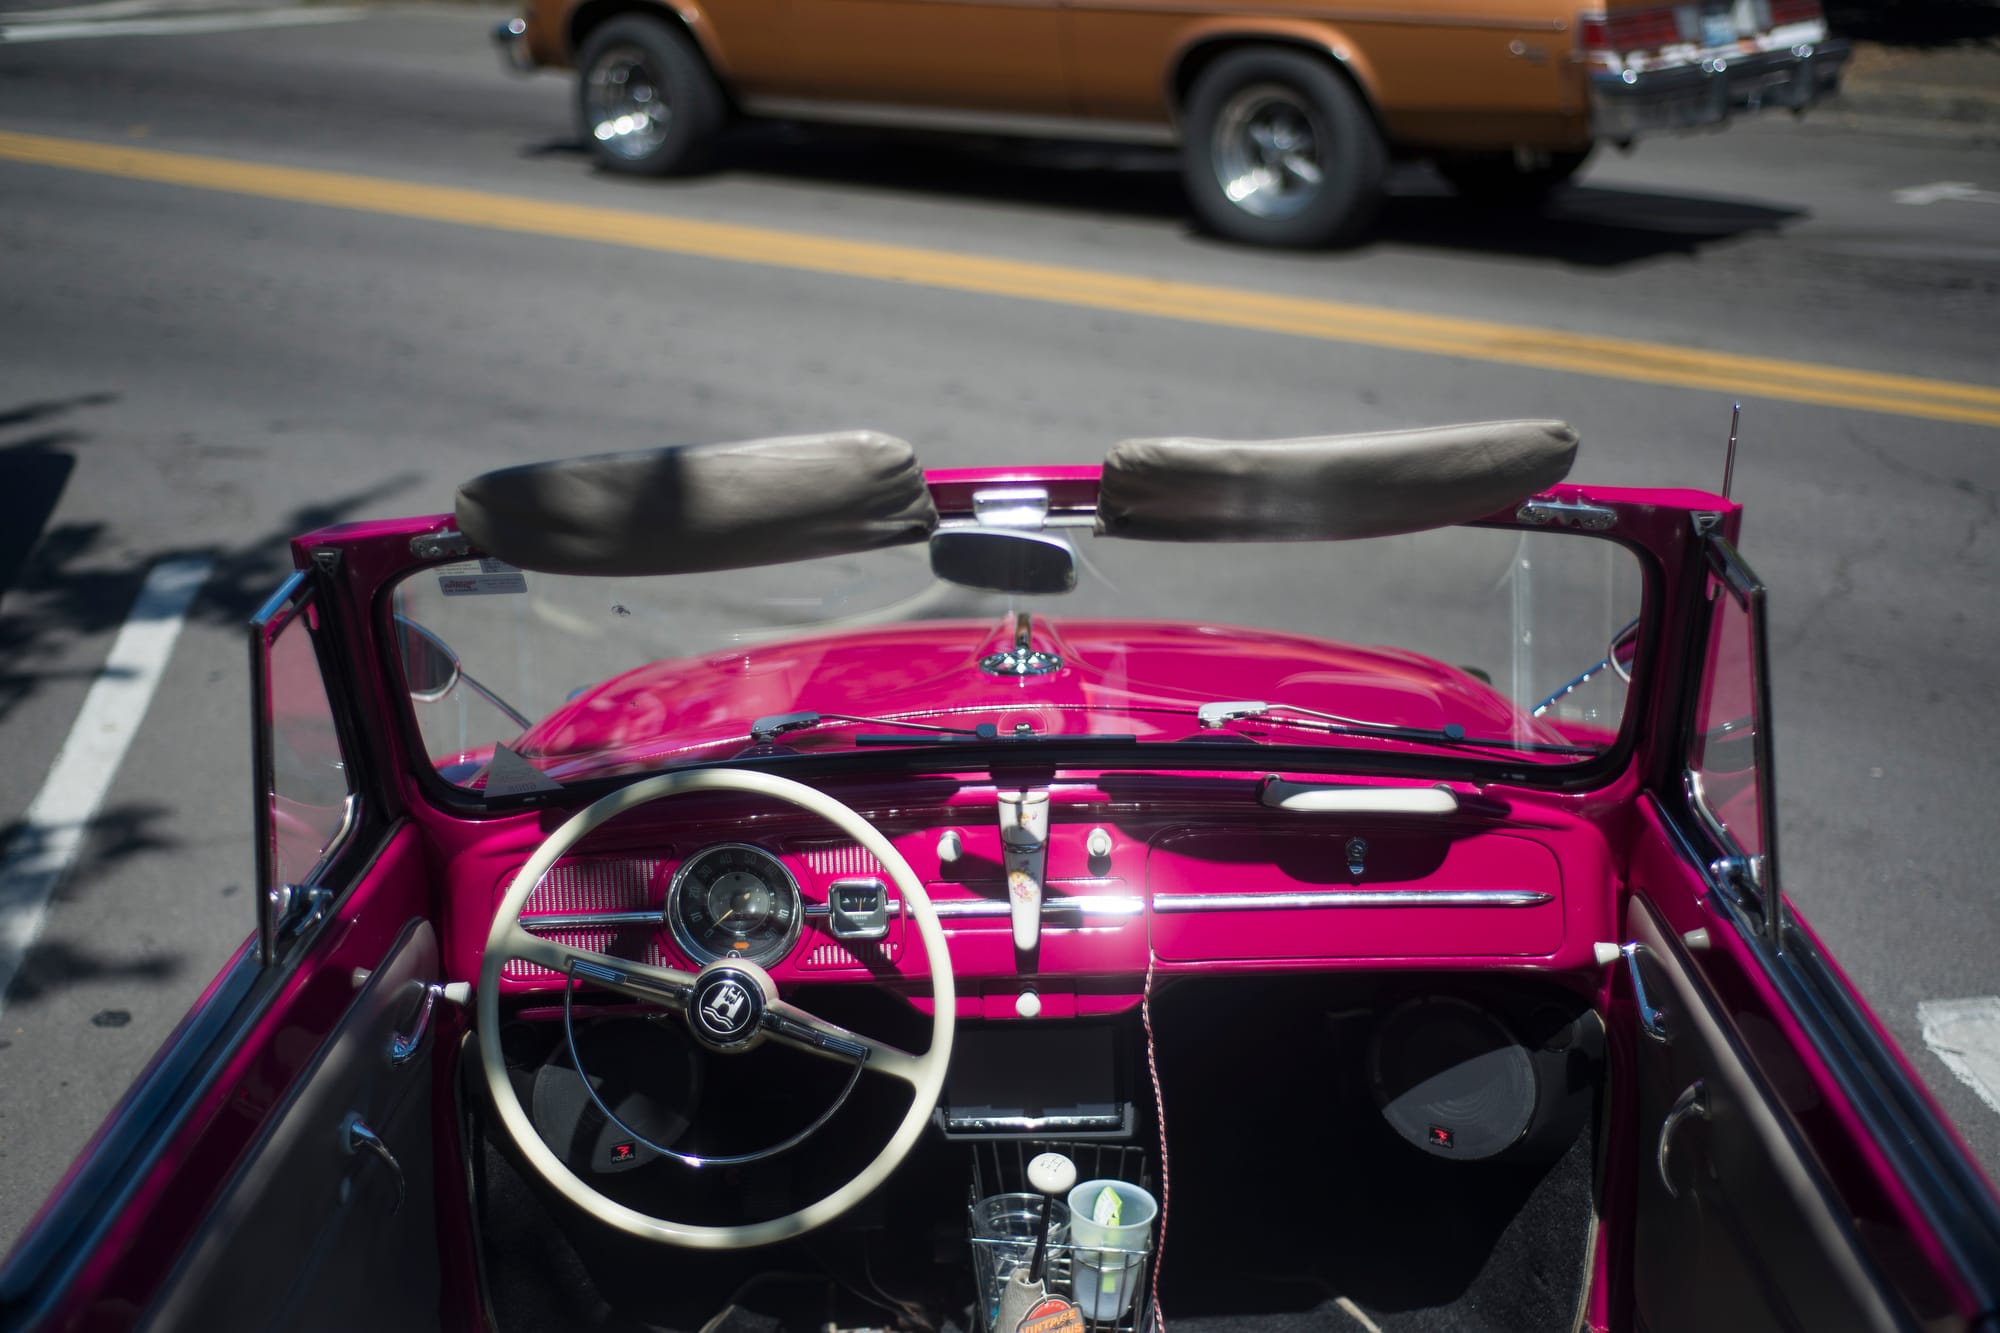 A bright pink VW Bug is parked on Main Street in downtown Vancouver during Cruise the Couve on Saturday, July 21, 2018. Cruise the Couve came back for a second year, after the event was adopted and renamed by local business owners in 2017.